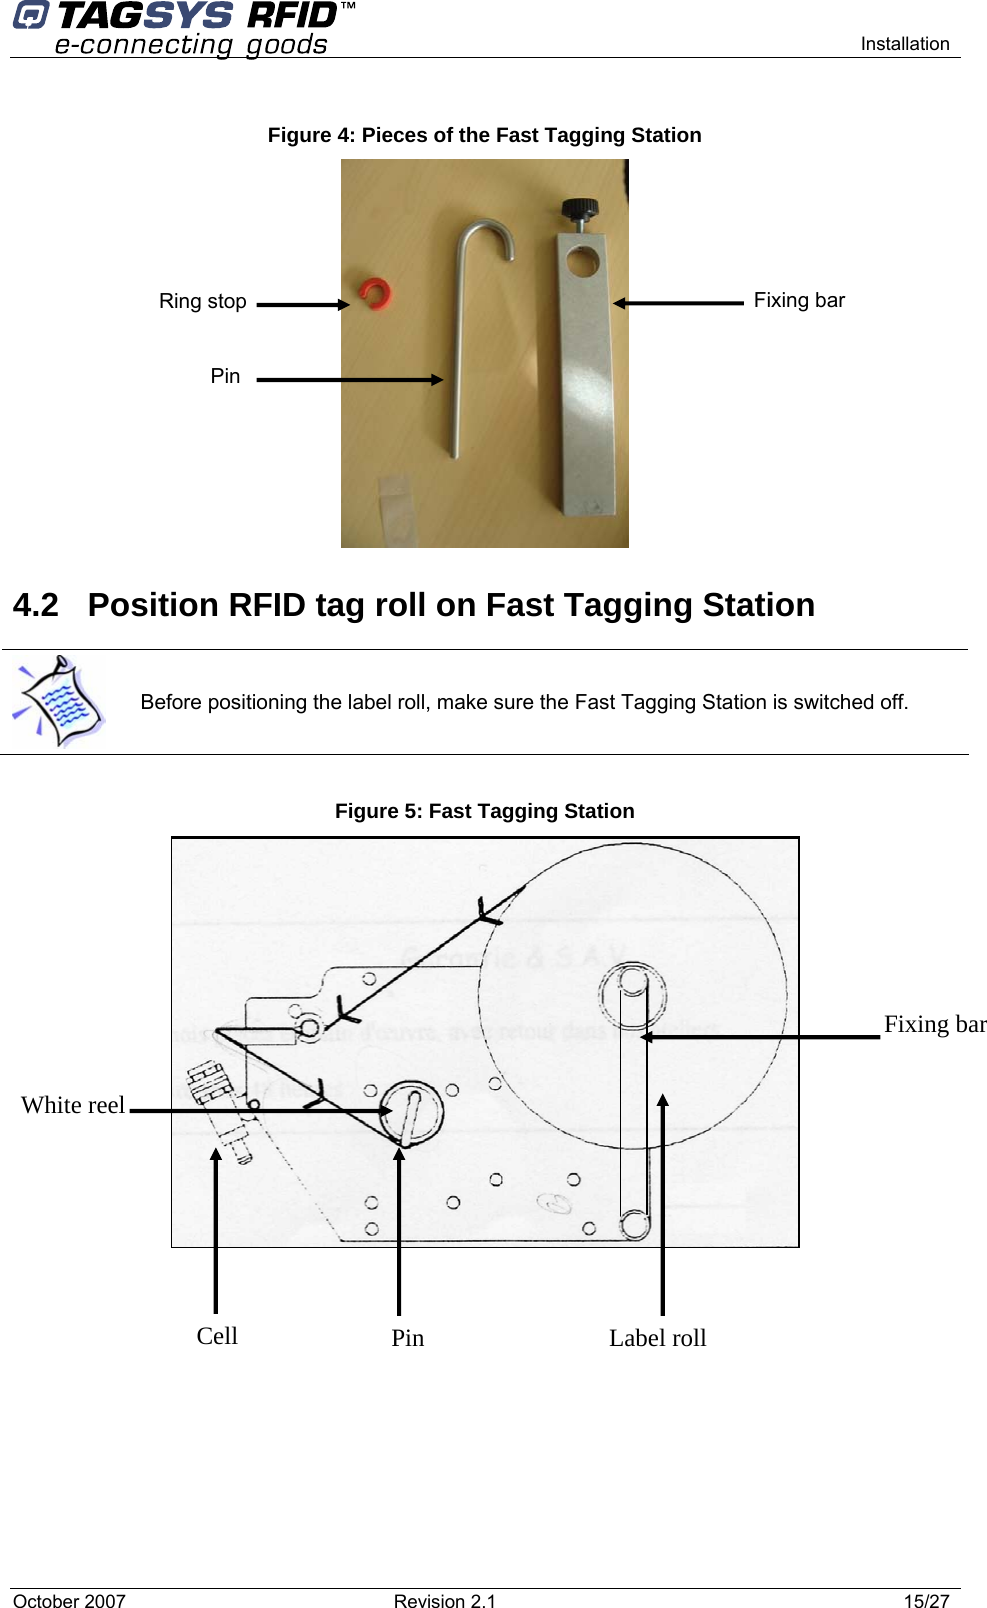    Installation  Figure 4: Pieces of the Fast Tagging Station   Pin Ring stop  Fixing bar 4.2  Position RFID tag roll on Fast Tagging Station  Before positioning the label roll, make sure the Fast Tagging Station is switched off.  Figure 5: Fast Tagging Station       White reel Cell  Label roll Pin Fixing bar October 2007  Revision 2.1  15/27 